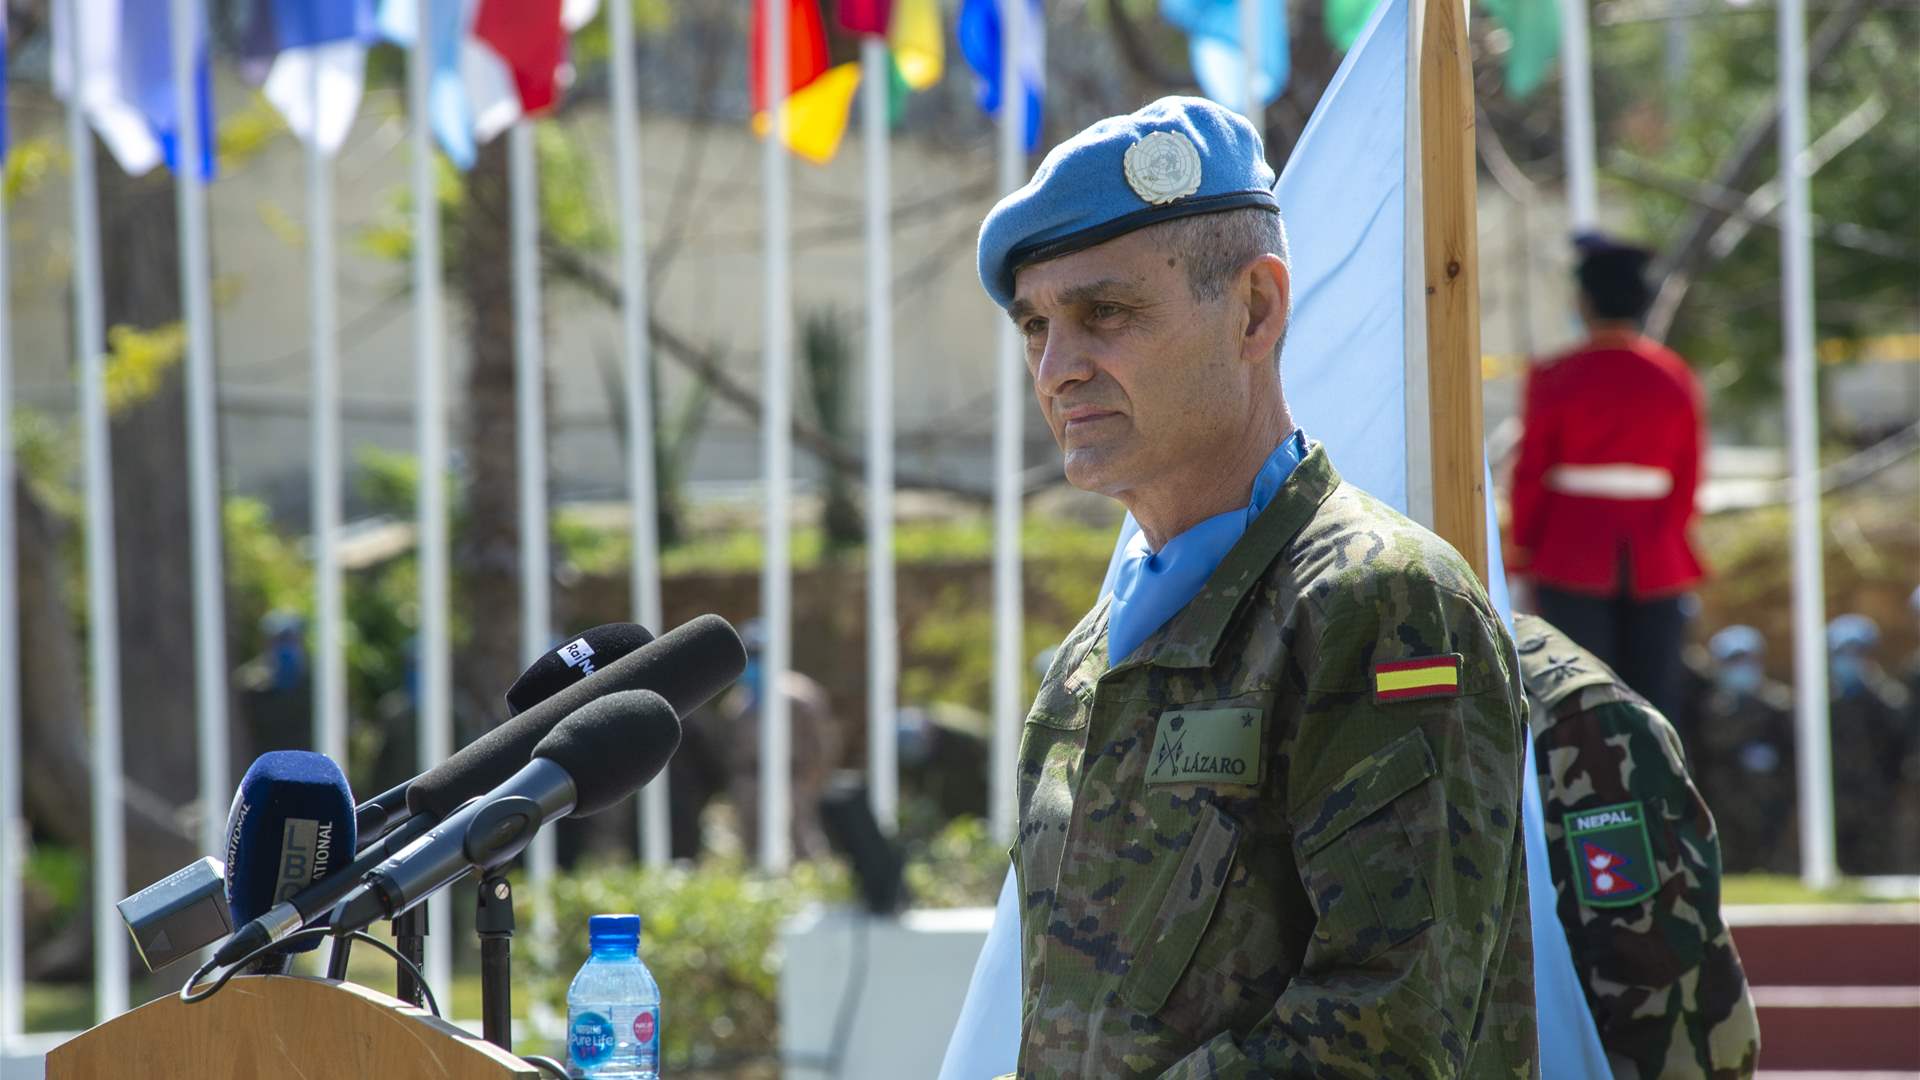 Head of UNIFIL urges parties to reduce tensions along Blue Line